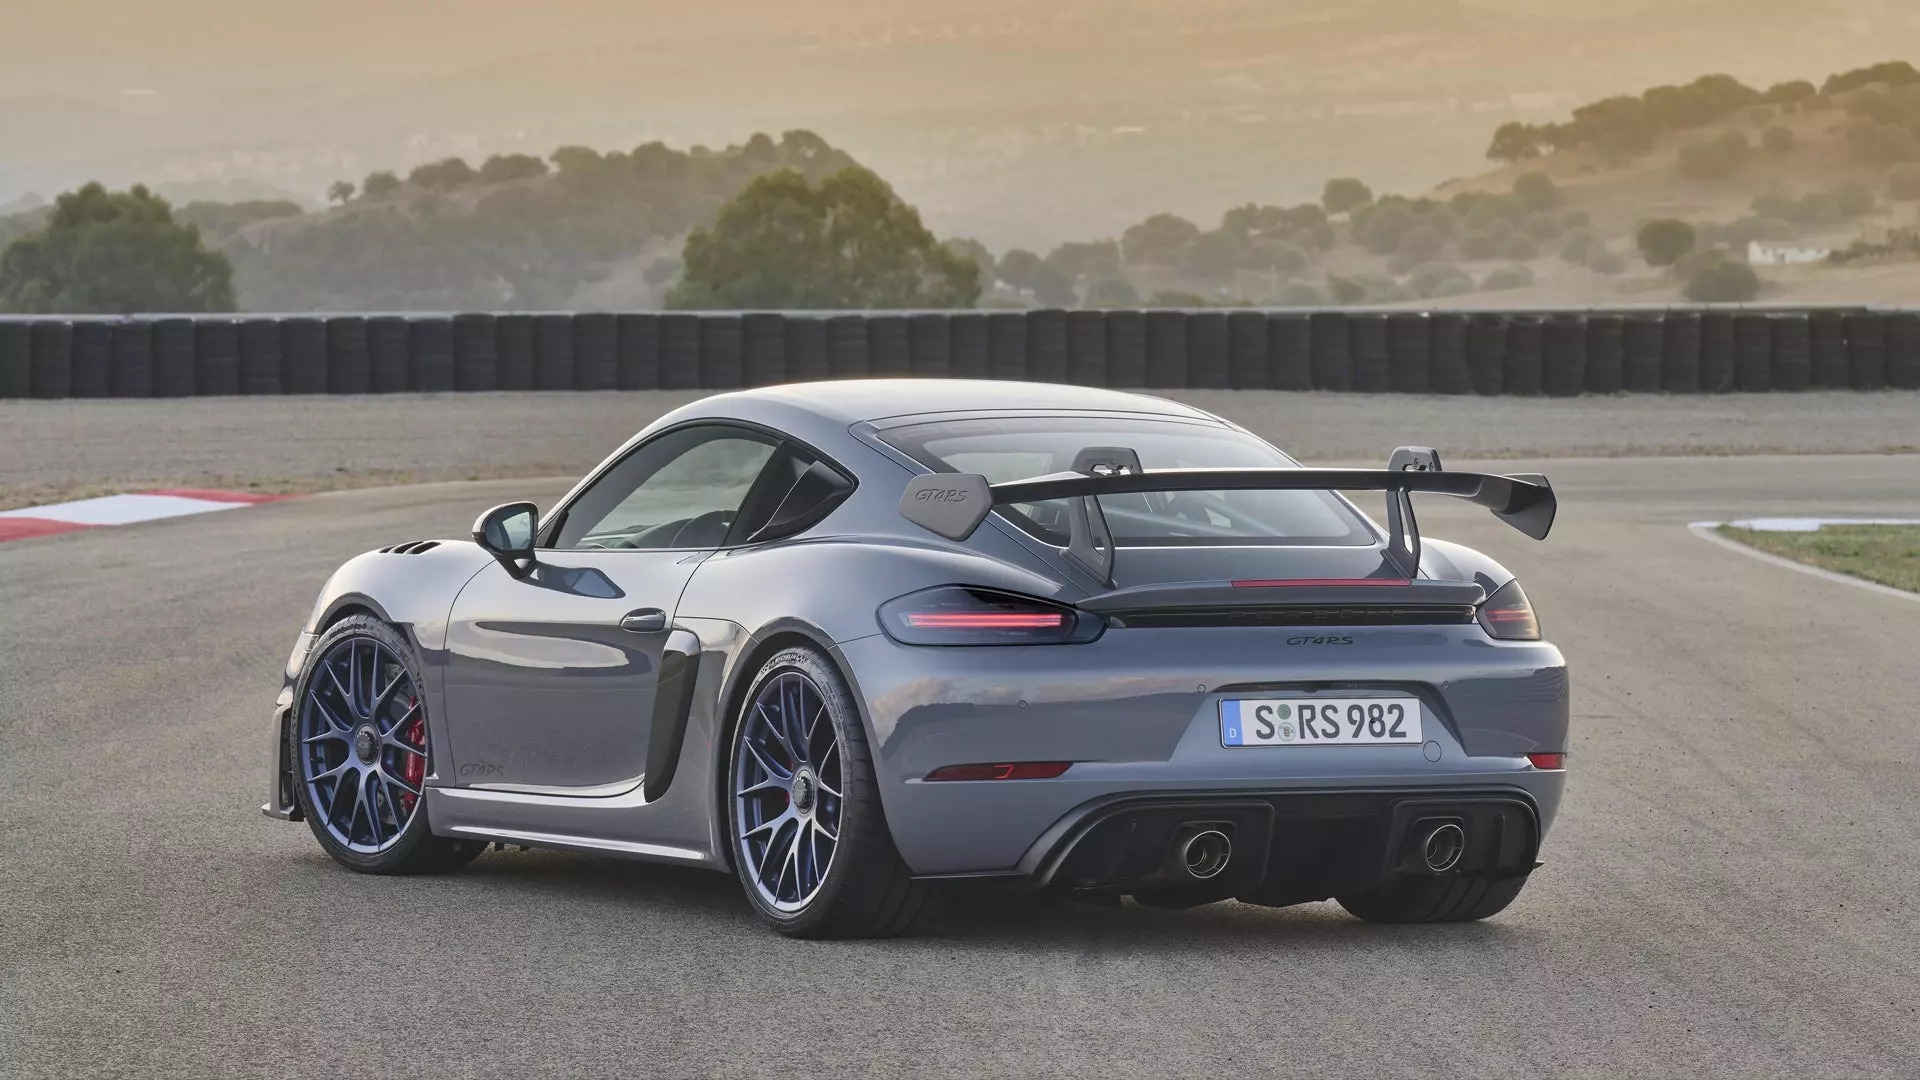 The GT4 RS Cayman Is in Serious Danger of Becoming the Coolest New Porsche | Autance